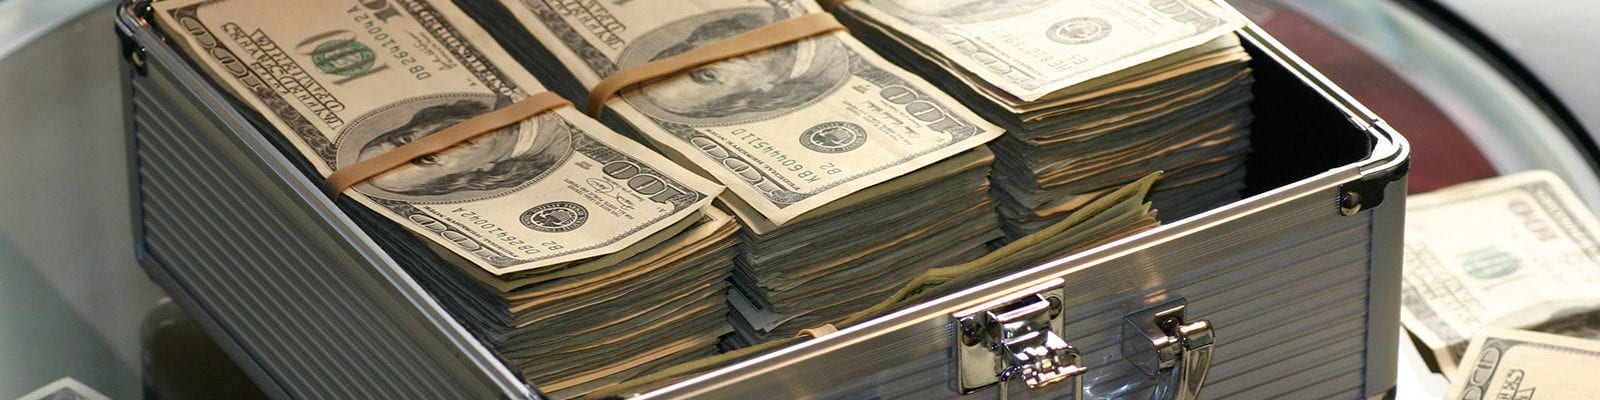 A briefcase packed full of cash sits open on a glass table, surrounded by more cash.